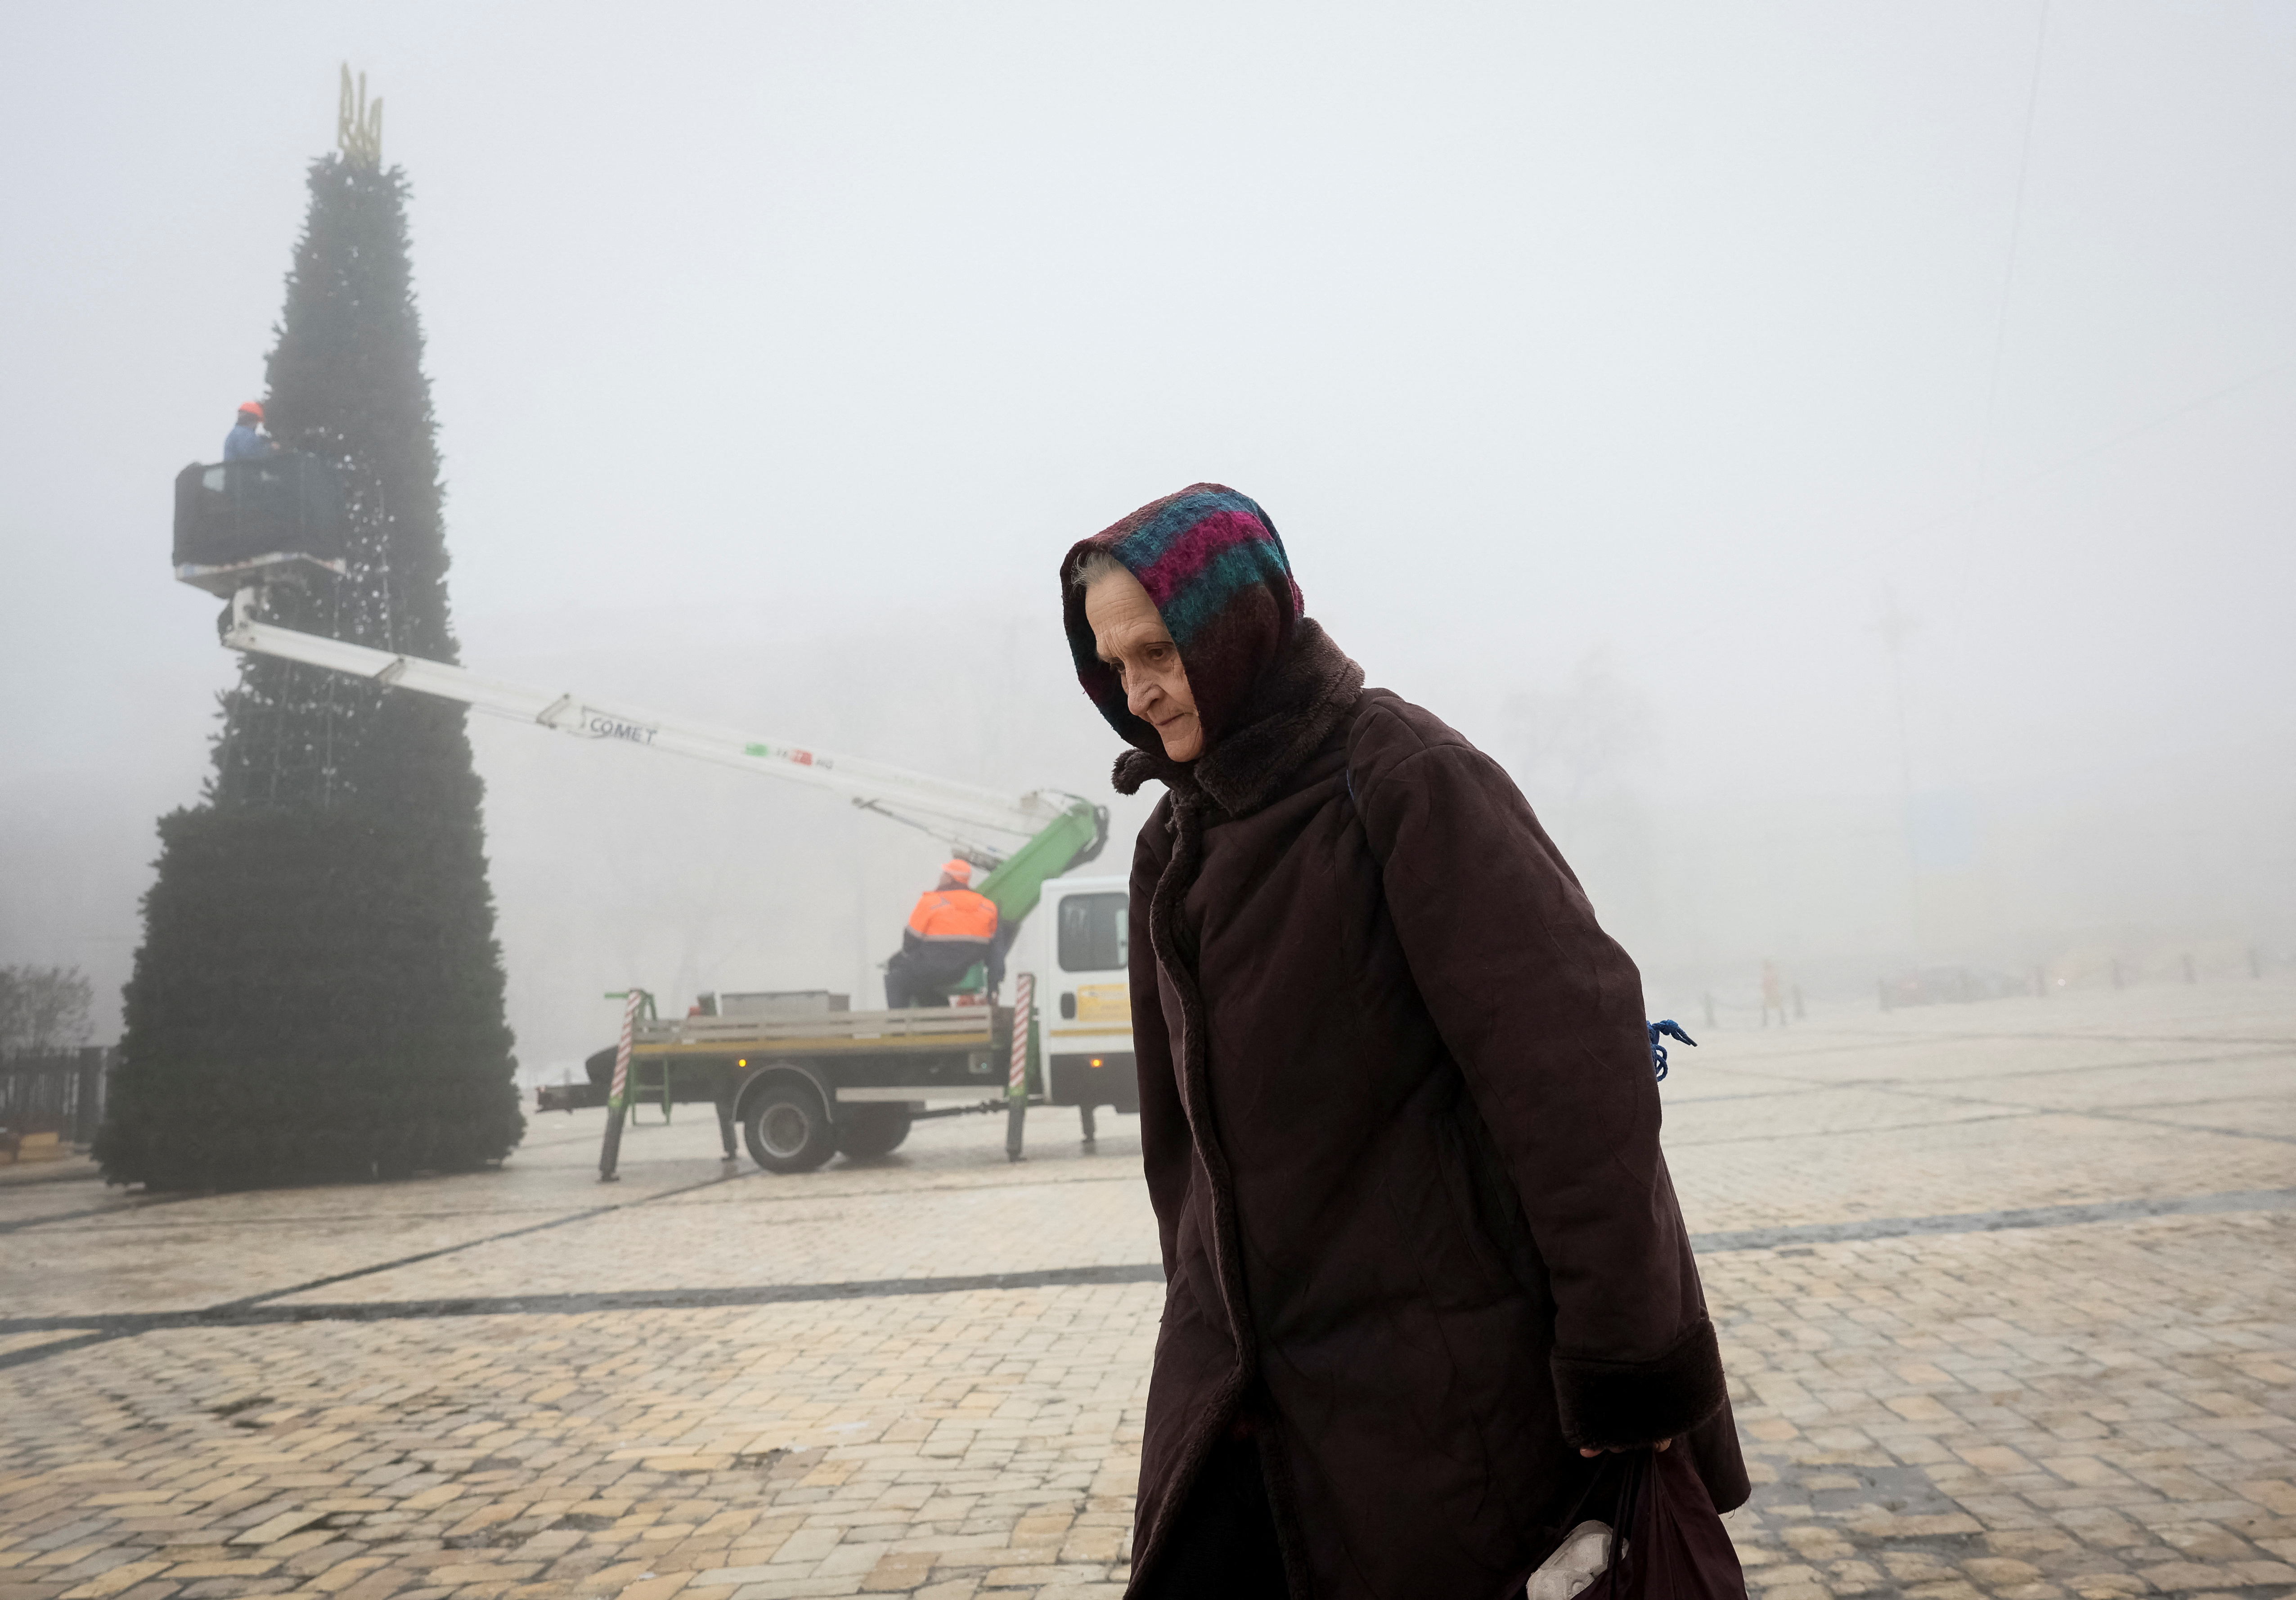 An old woman walks at the Sofiyska square as municipal workers install a Christmas tree during a heavy fog in Kyiv